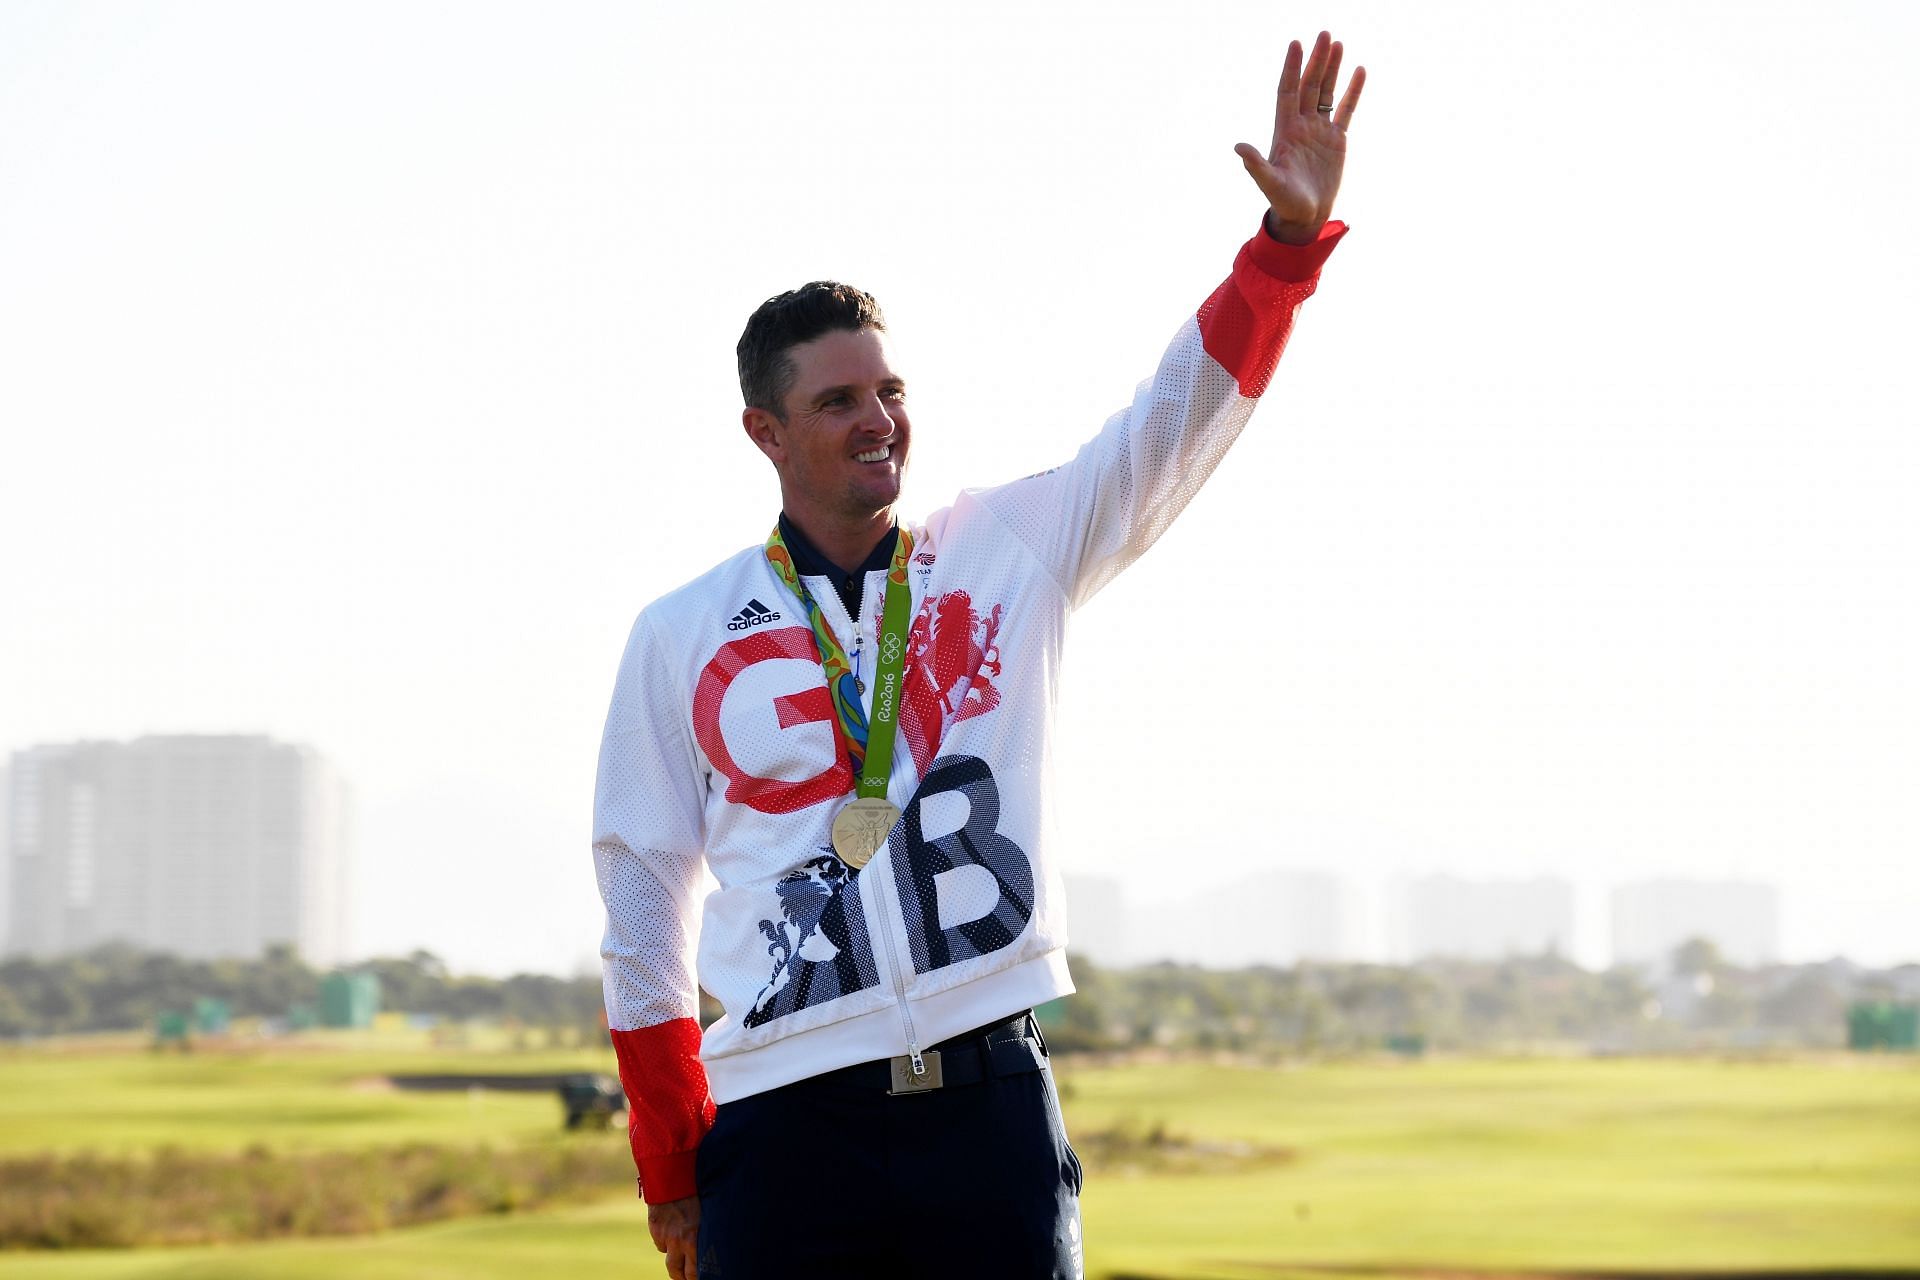 Justin Rose won a gold medal and a major